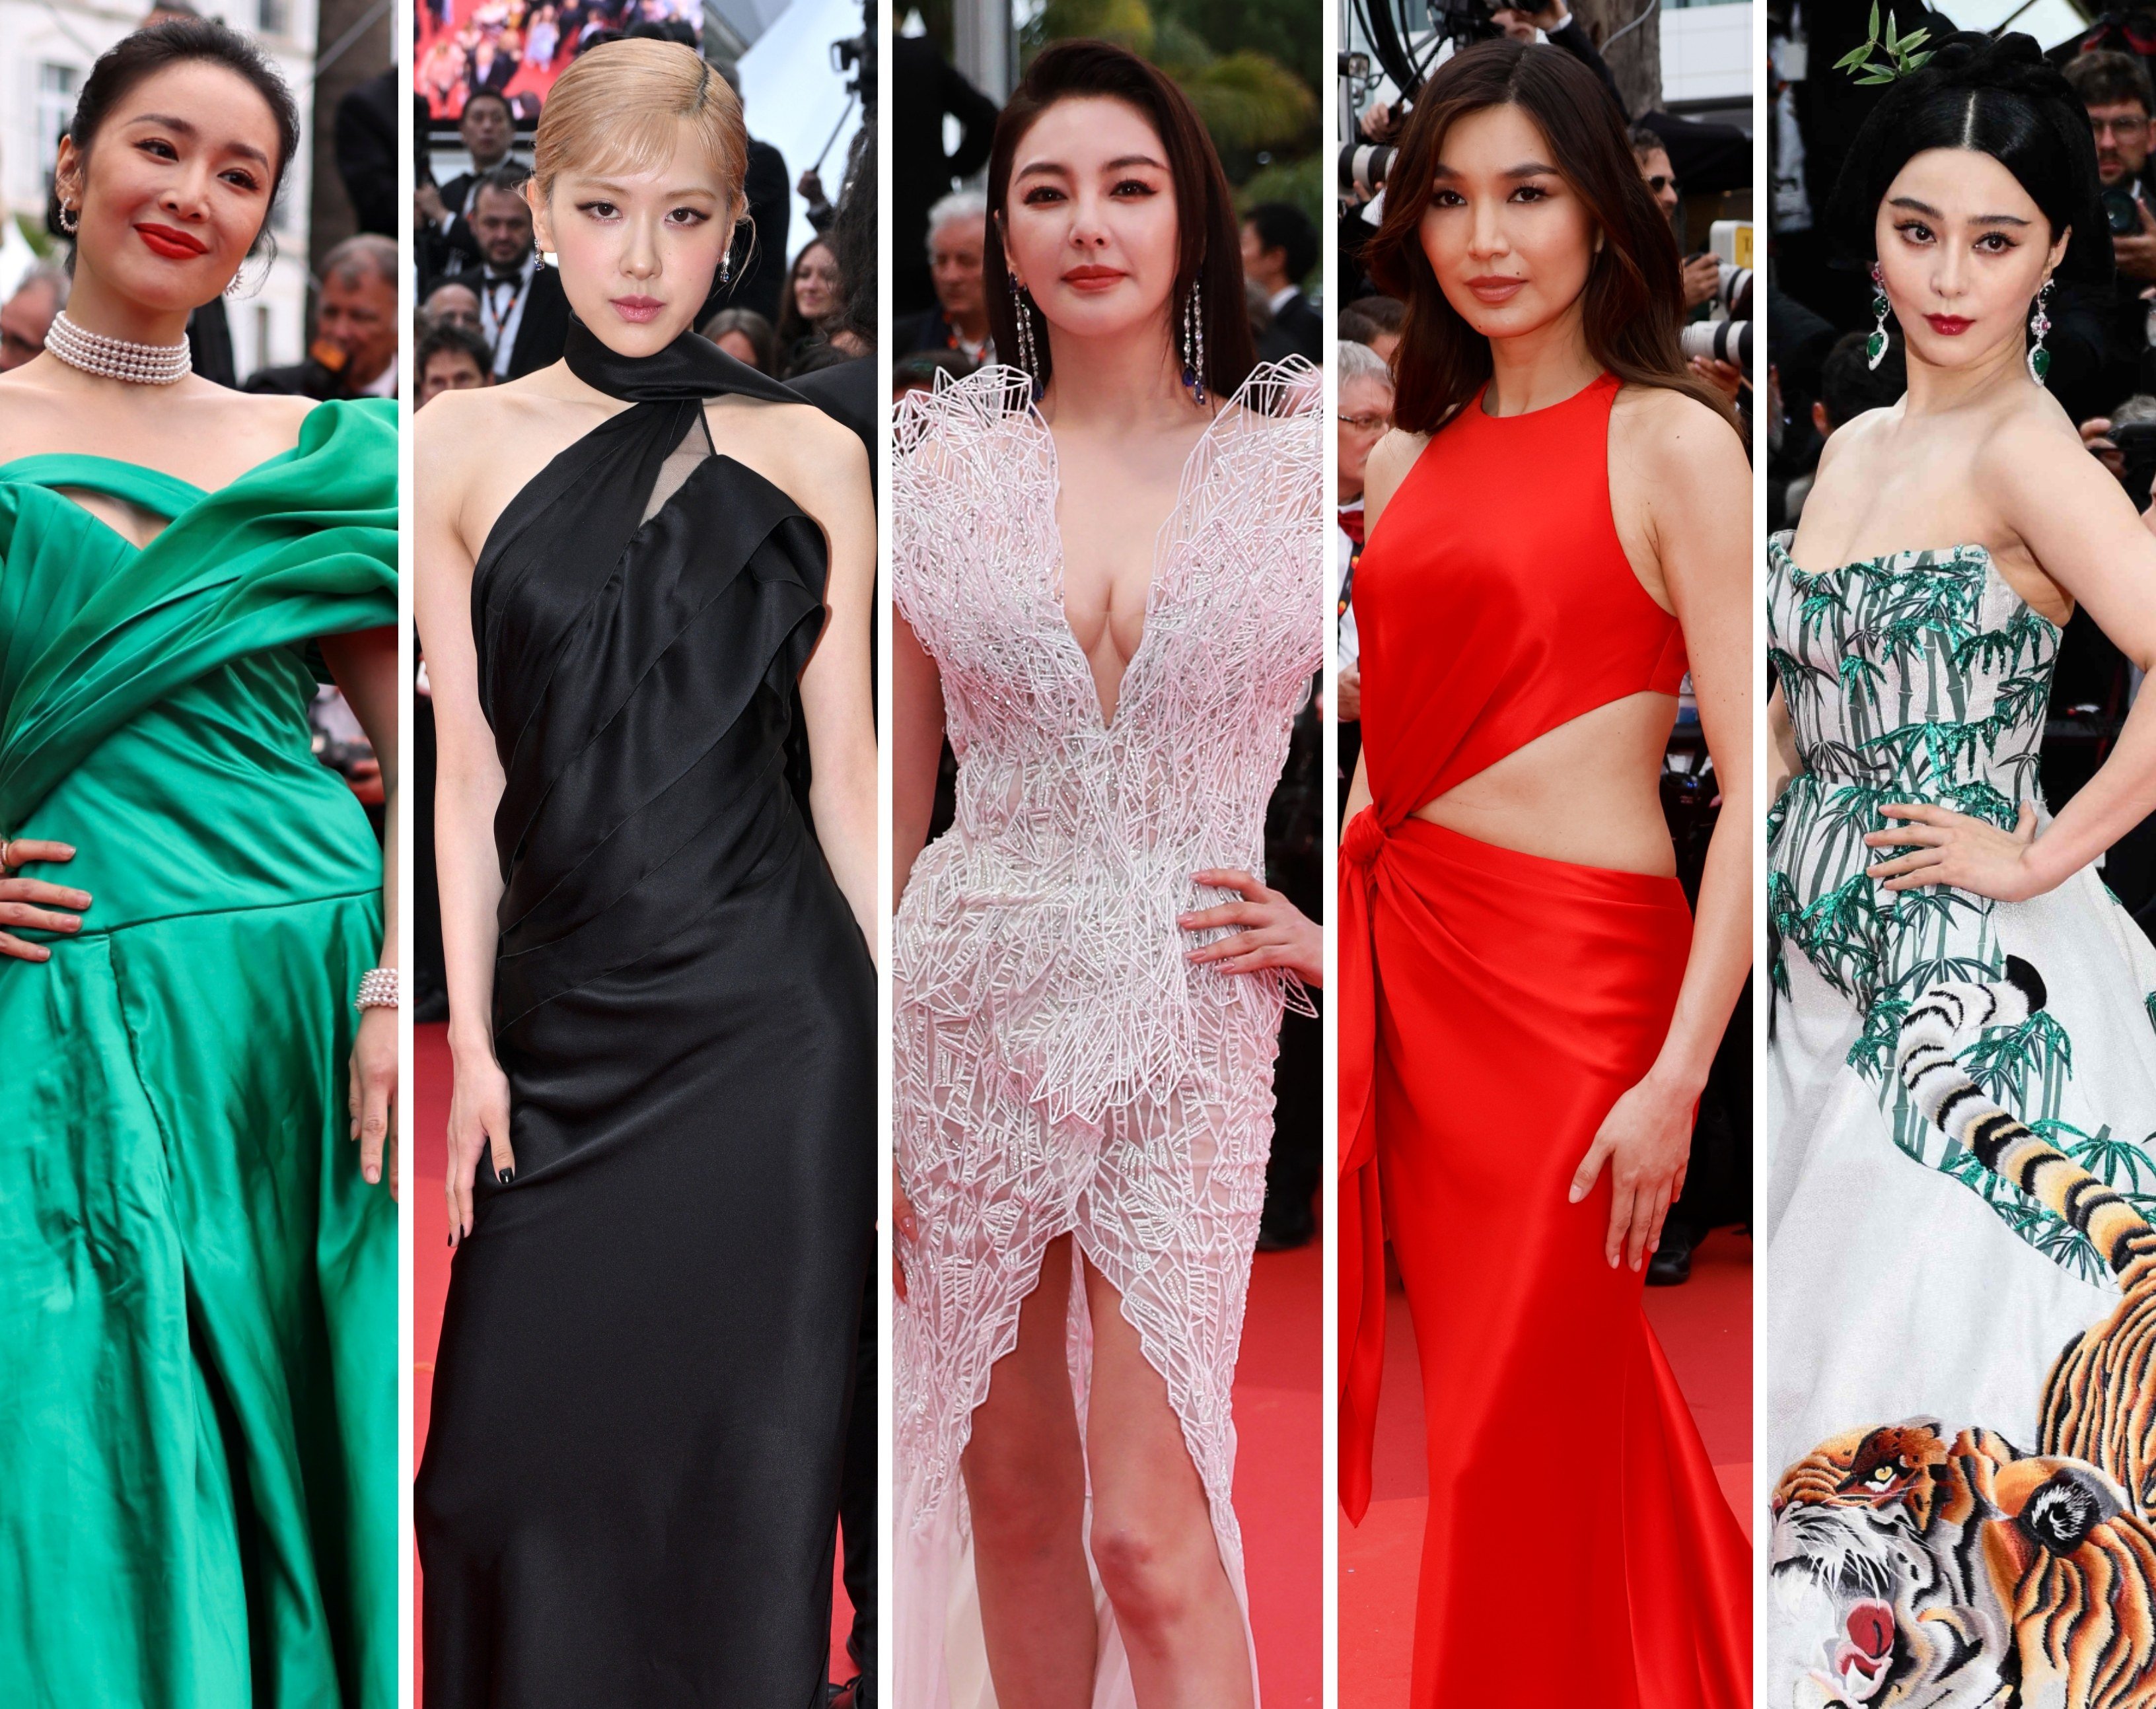 Asian celebrities including Gao Ye, Blackpink’s Rosé, Zhang Yuqi, Gemma Chan and Fan Bingbing gathered to attend the Cannes Film Festival – and looked stunning. Photo: Getty Images, AP, AFP